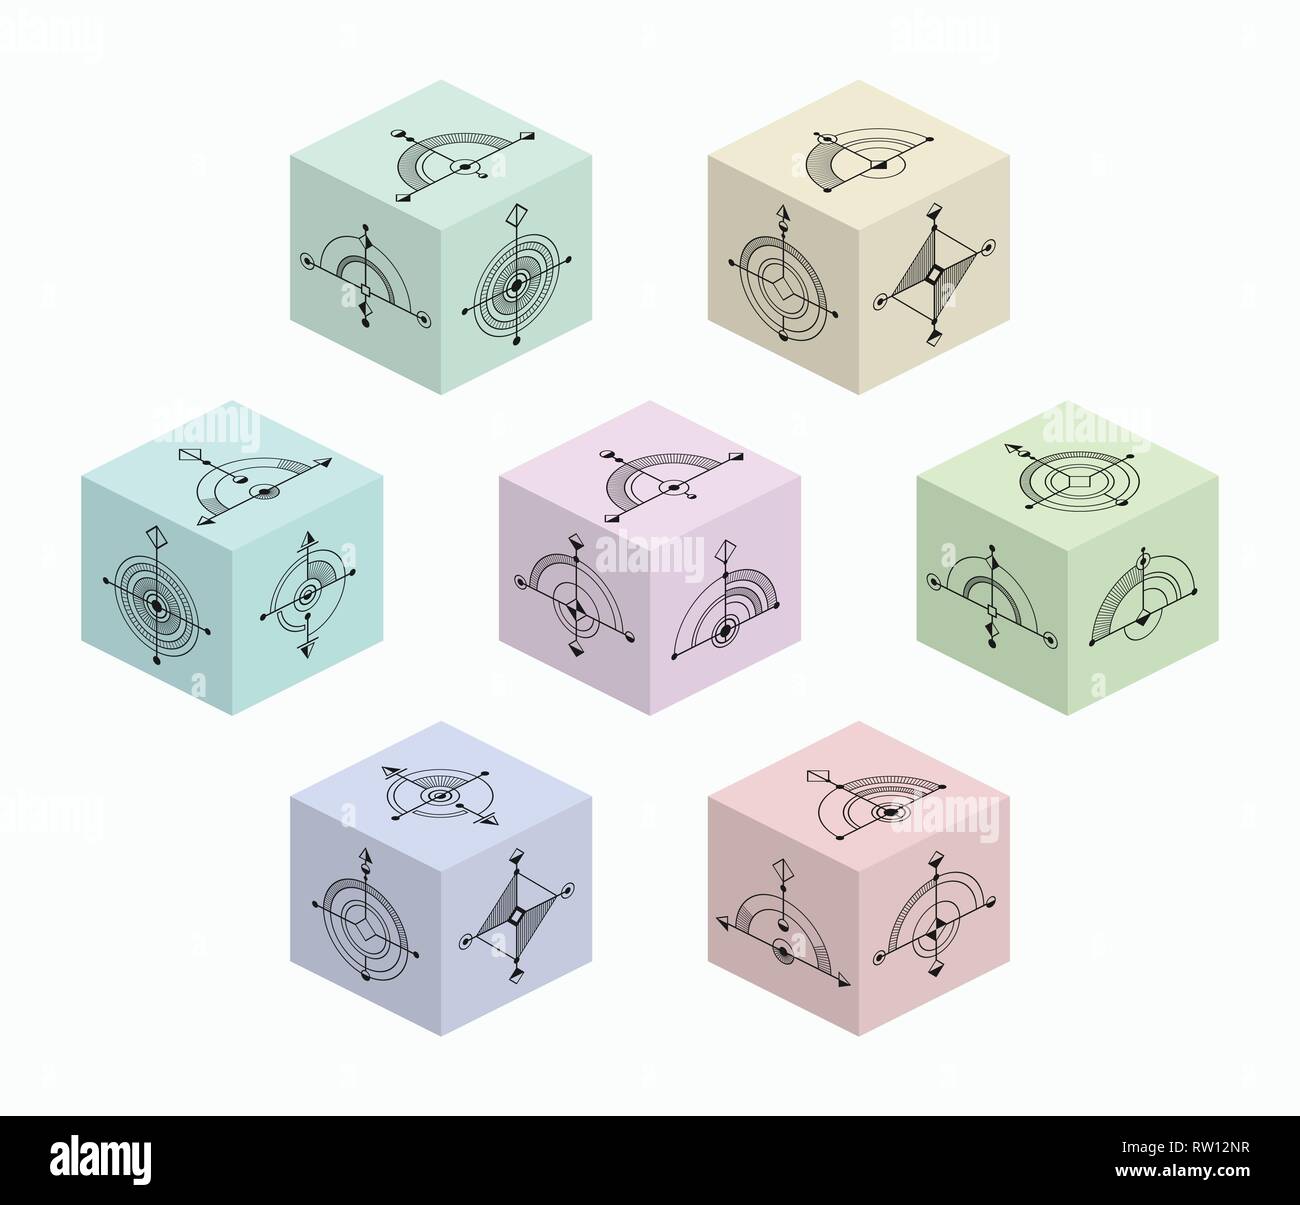 3D cubes with abstract symbols on each side. Set of colored spatial figures. Flat isometric graphics. Vector illustrations. Geometric logos isolated. Stock Vector